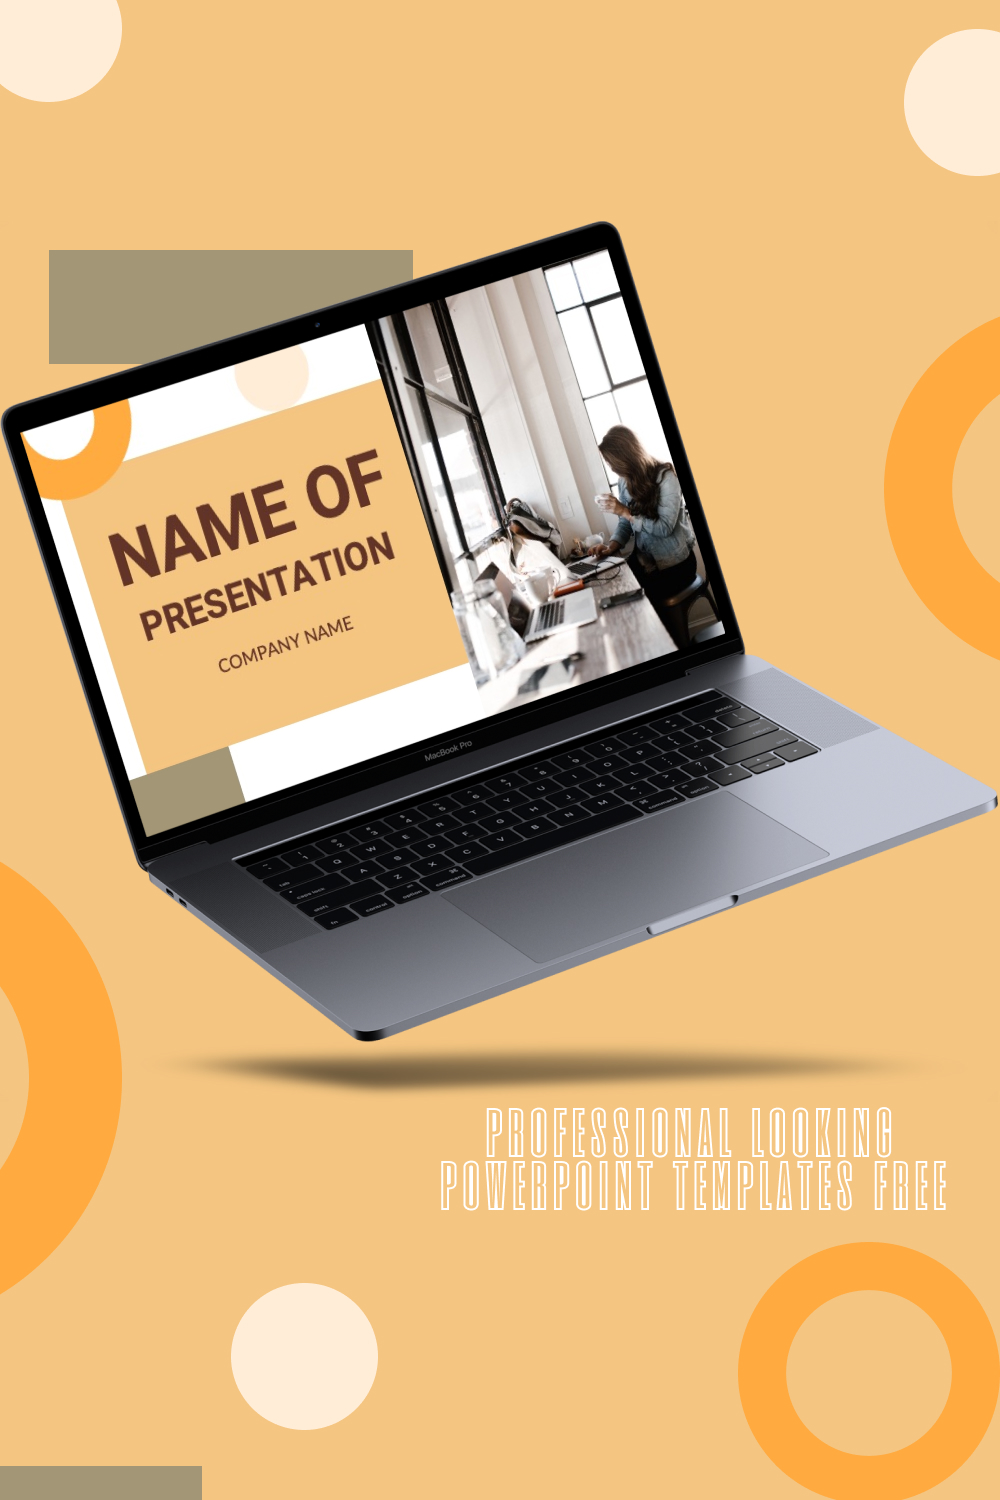 Professional looking powerpoint templates of pinterest.